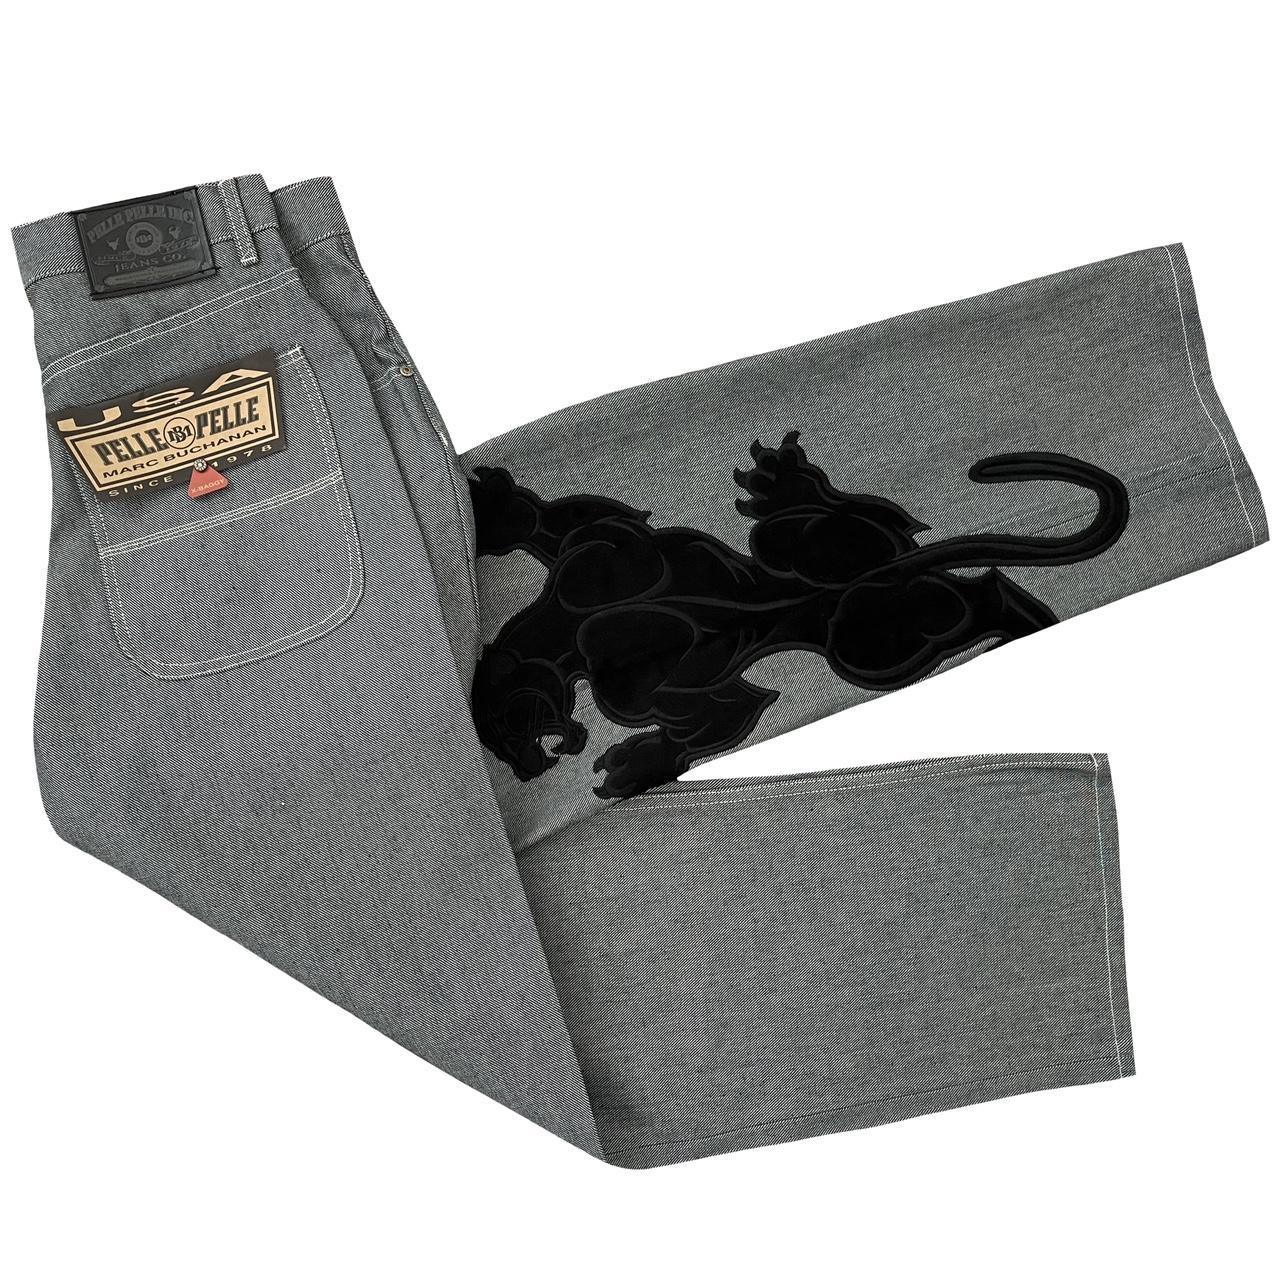 Pelle Pelle Panther Jeans - Known Source